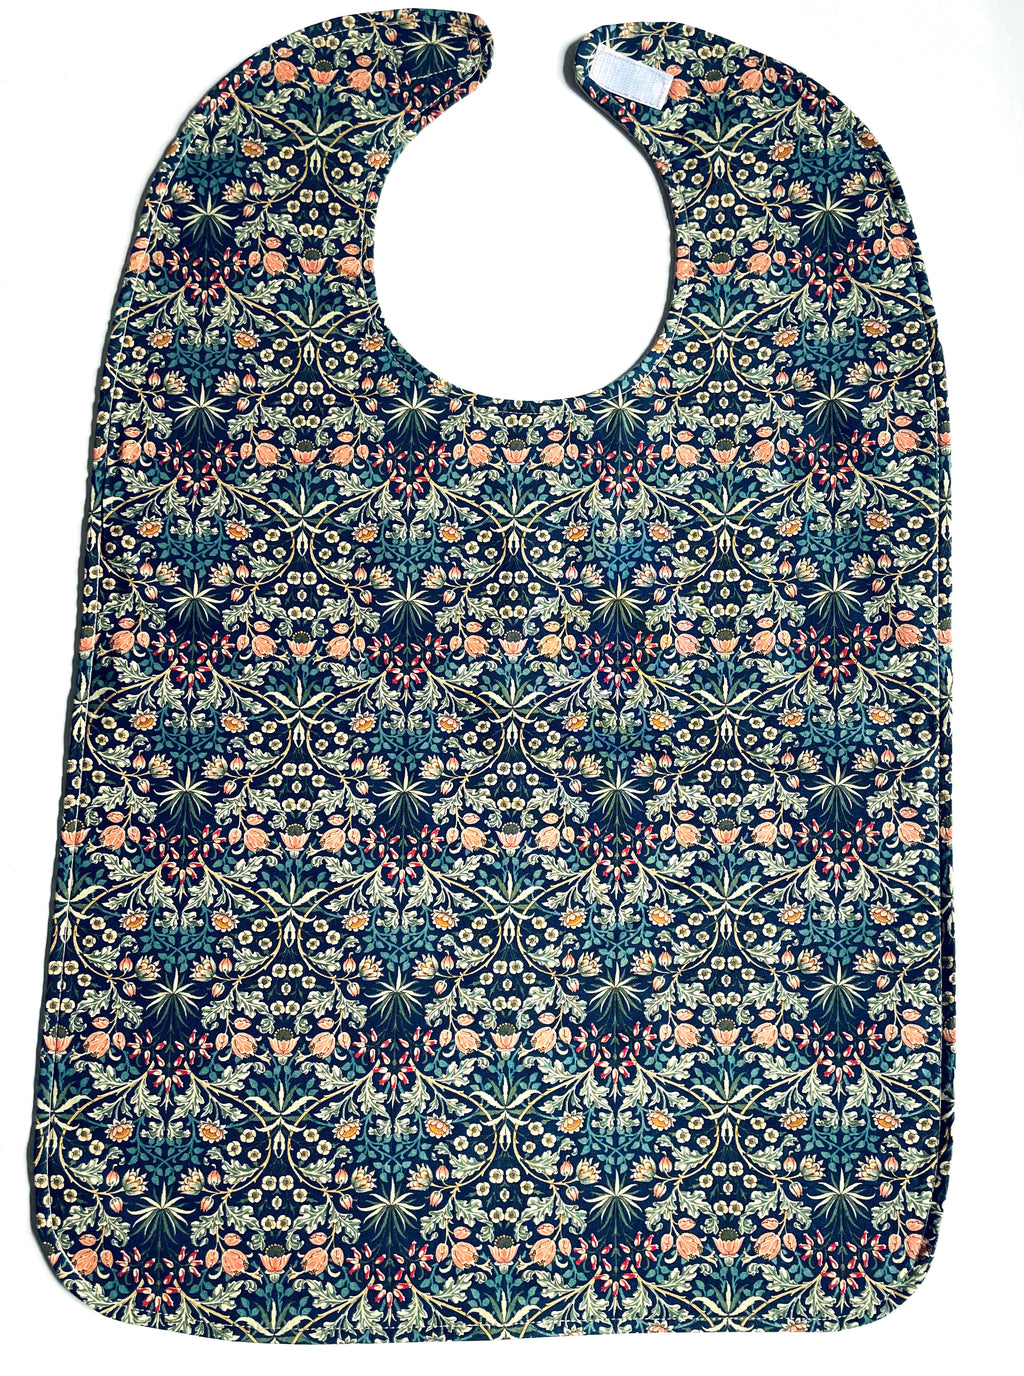 BAVETTE adult bib with blue rose and green flowers on three layers of machine washable premium cotton, Velcro back closure, 26" x 17" 